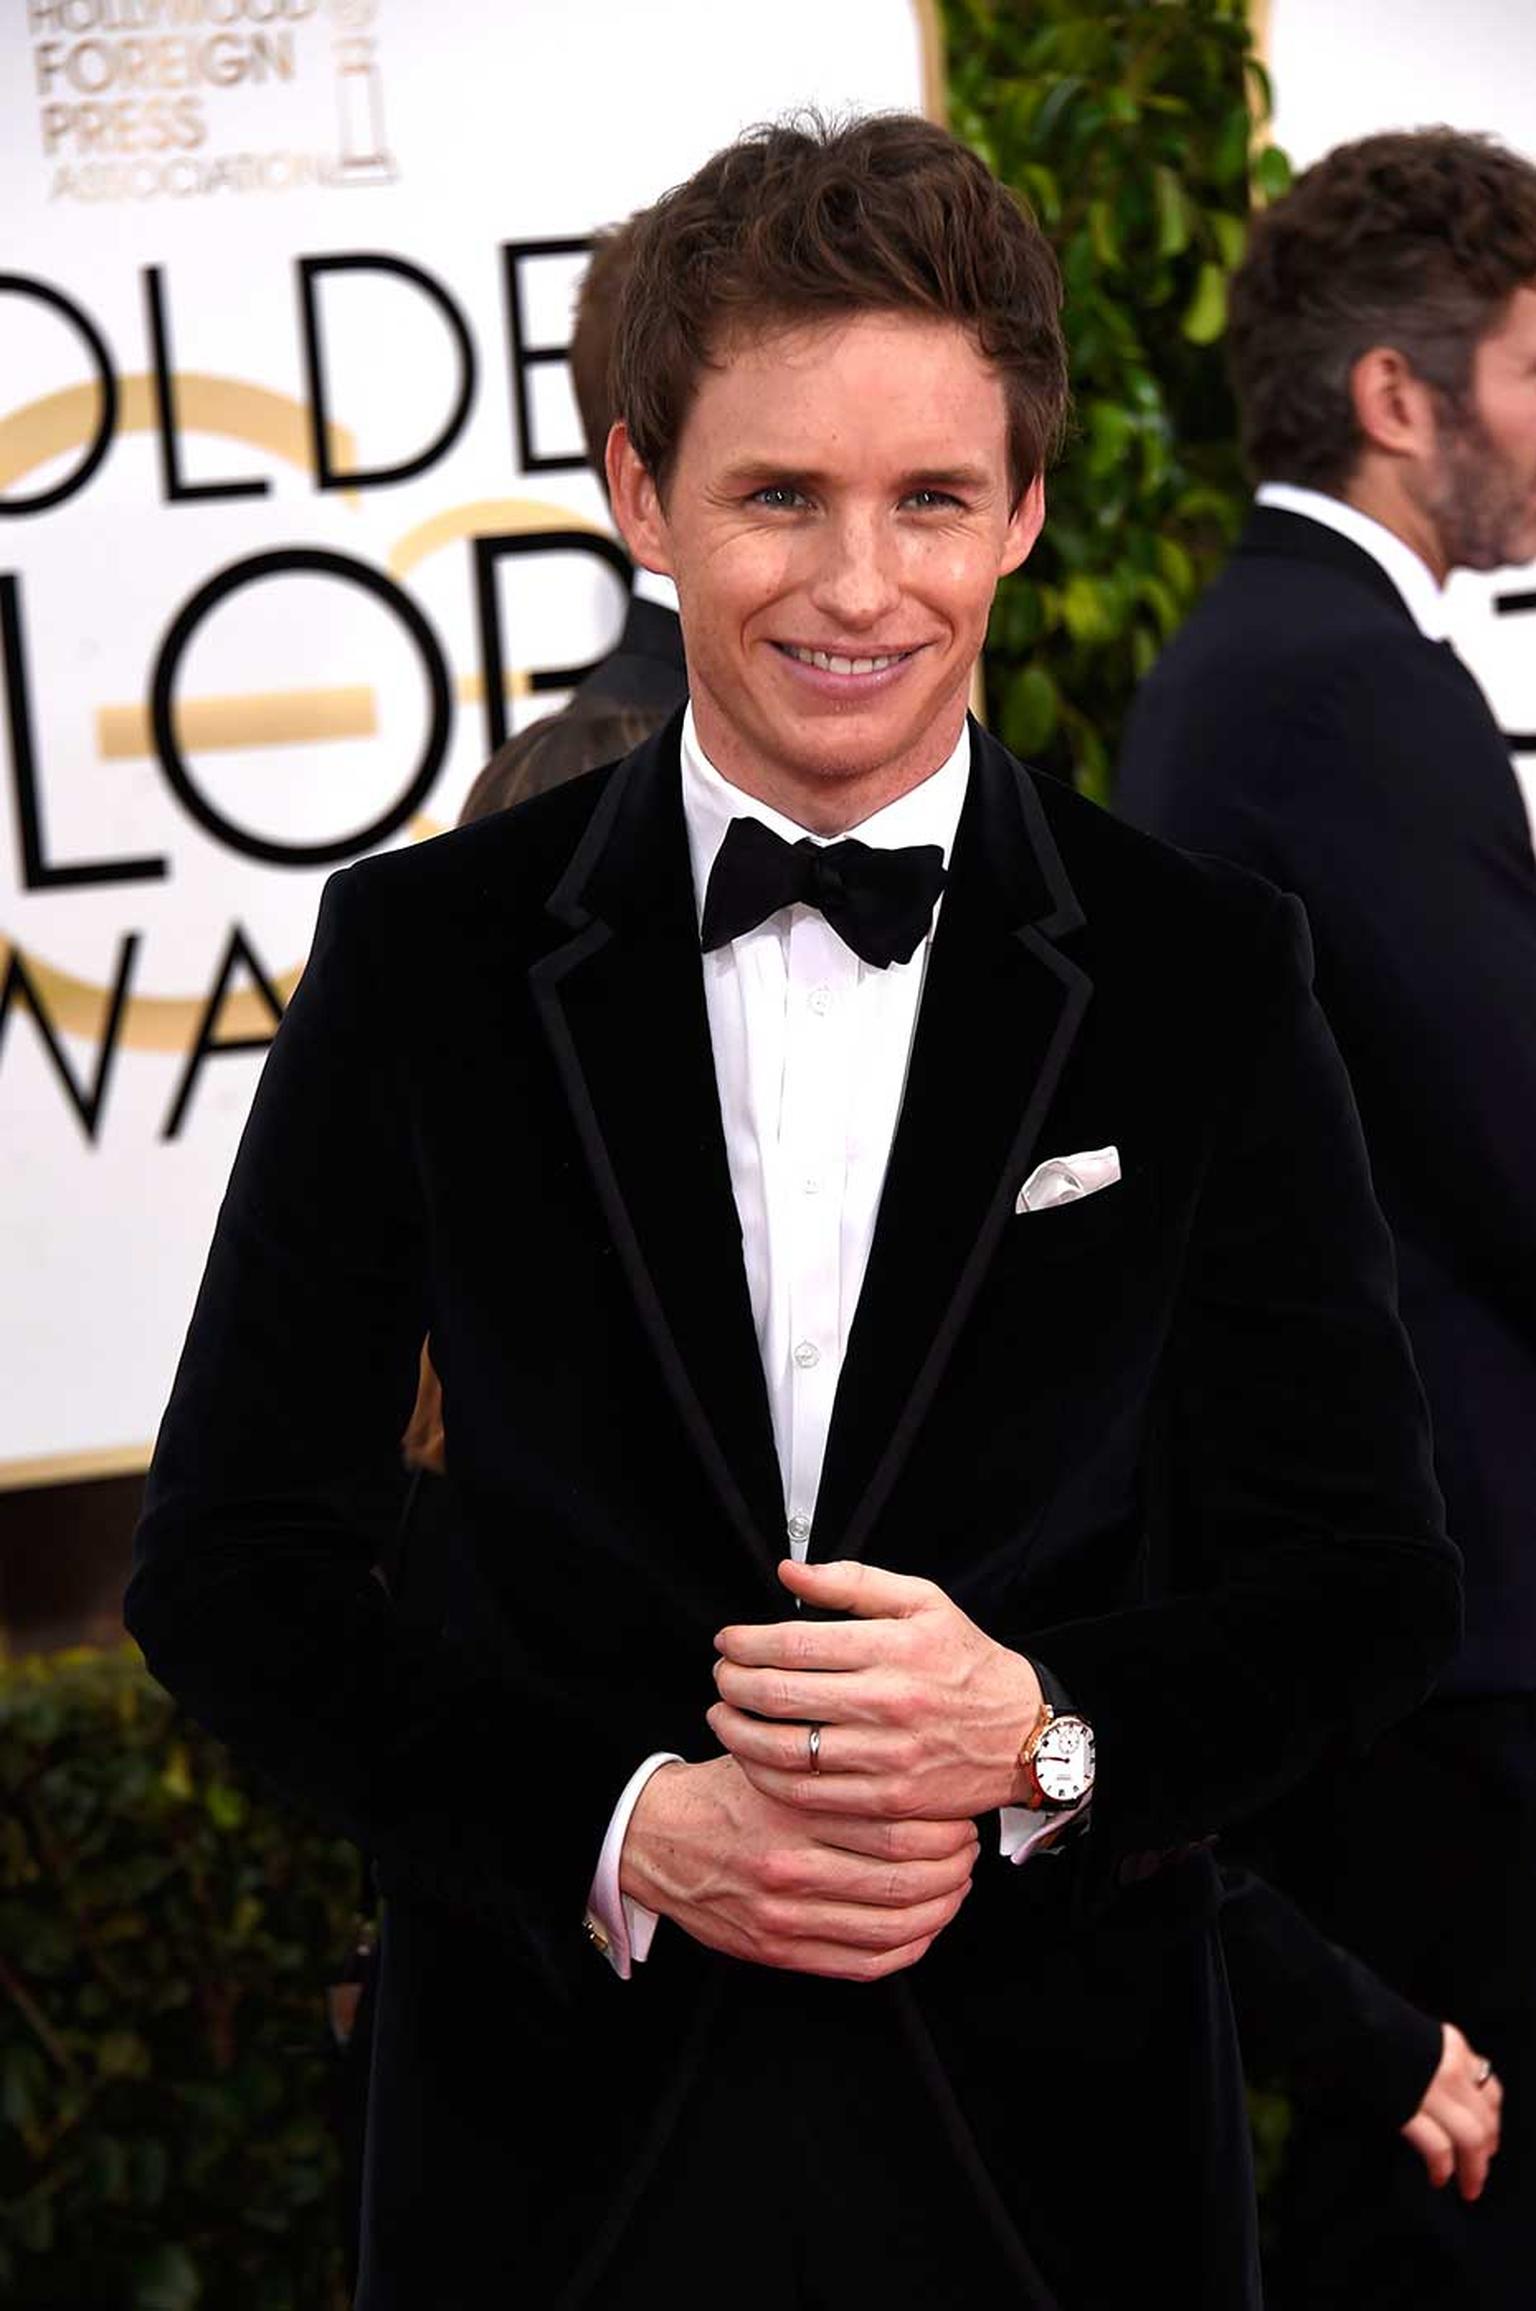 British actor Eddie Redmayne walked the red carpet wearing a Chopard Classic Manufacture watch in rose gold.